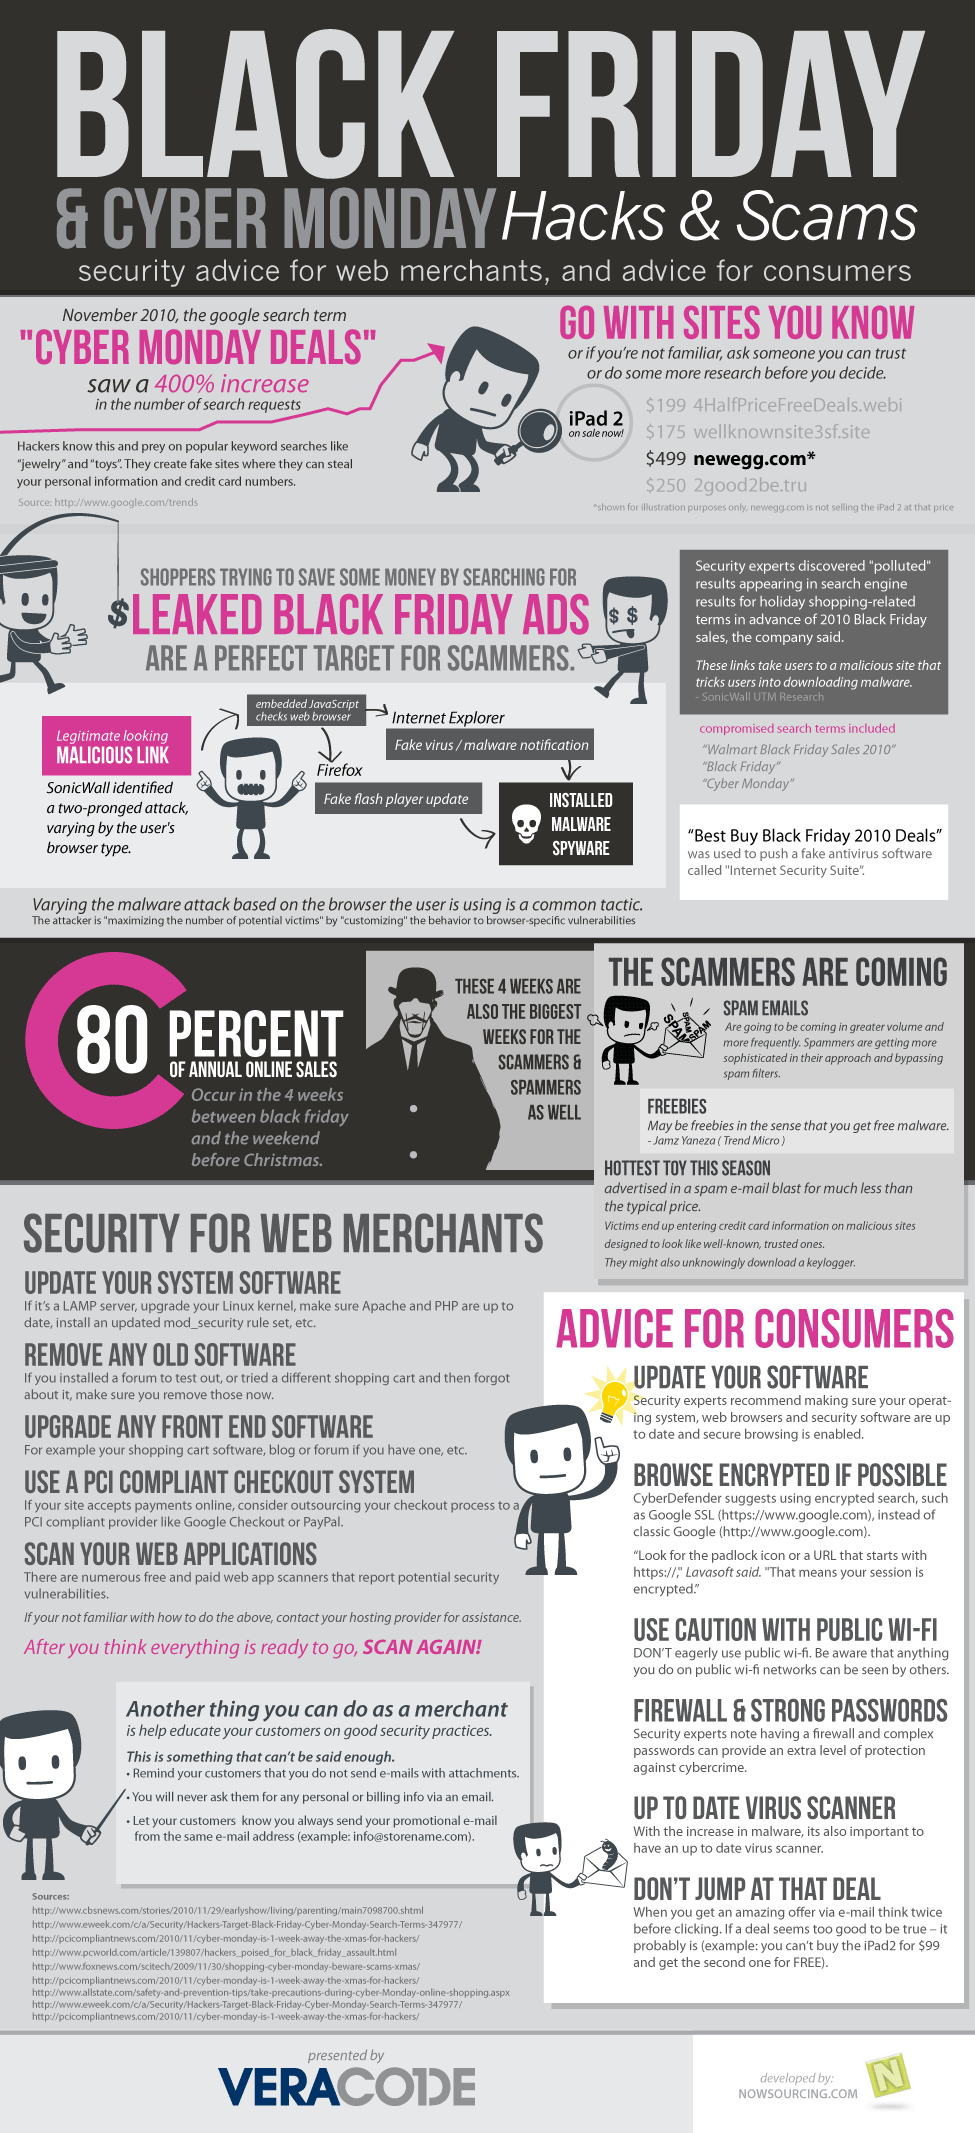 Black Friday Cyber Monday Hacks and Scams